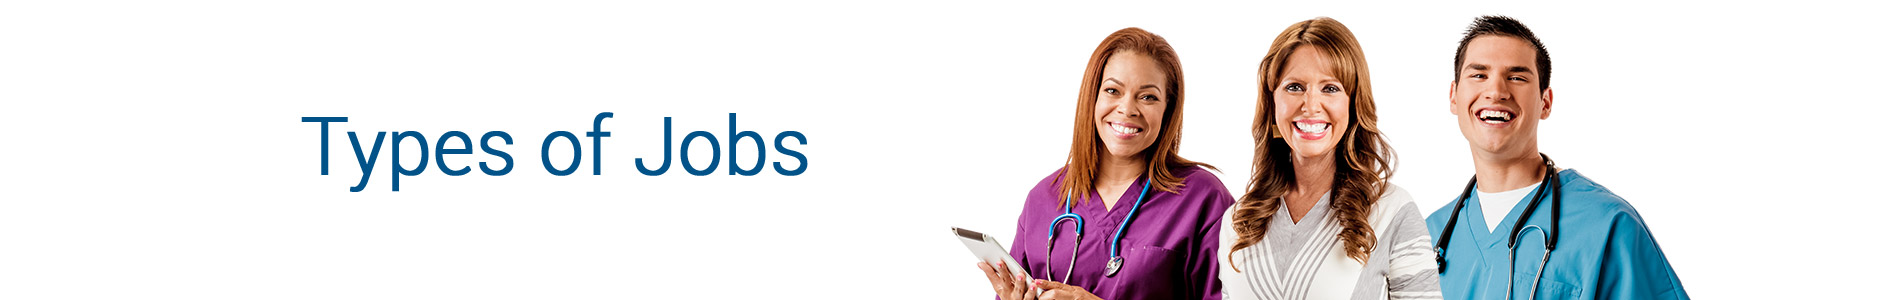 Healthcare - Types of Jobs page banner